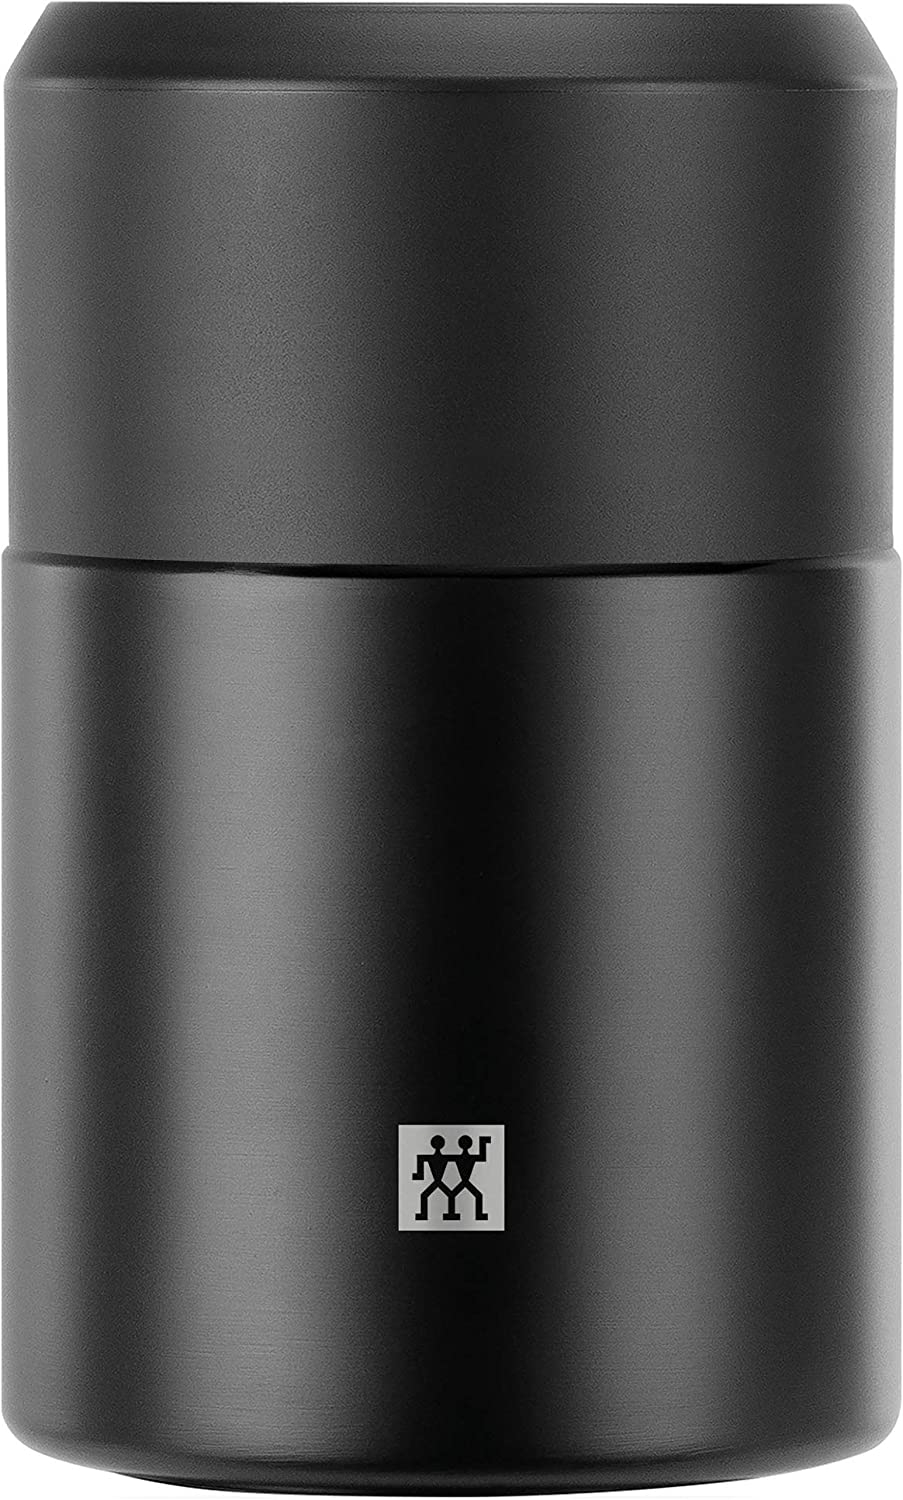 ZWILLING Thermo Insulated Food jar, 23.6 oz, Matte Black Import To Shop ×Product customization General Description Gallery